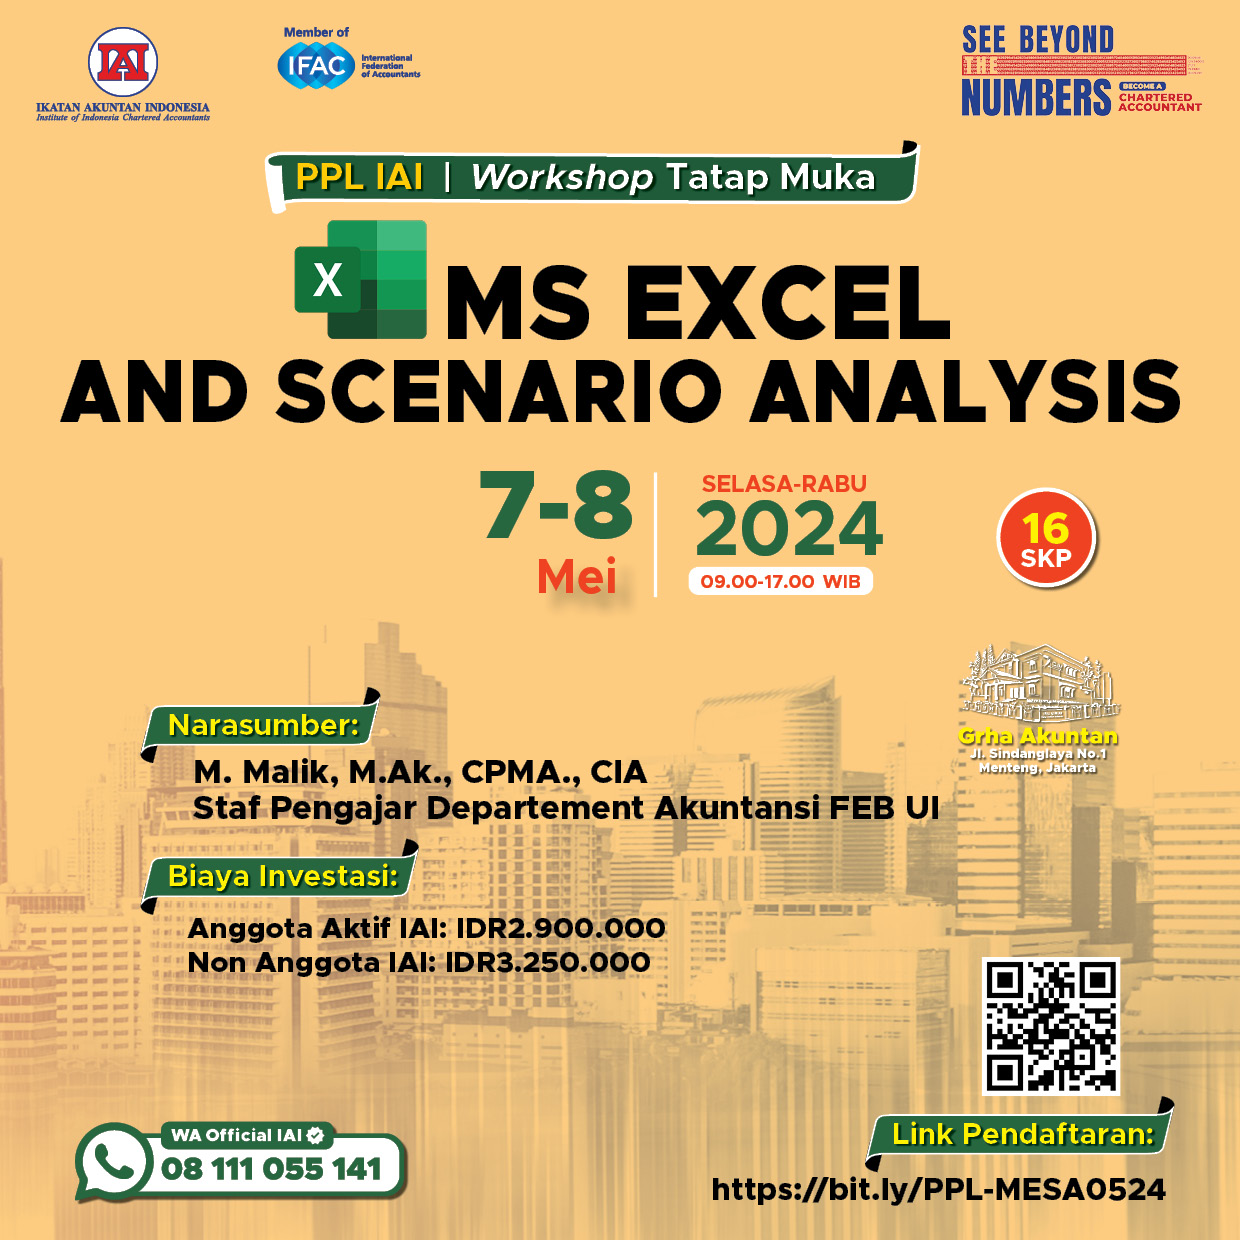 Ms. Excel and Scenario Analysis